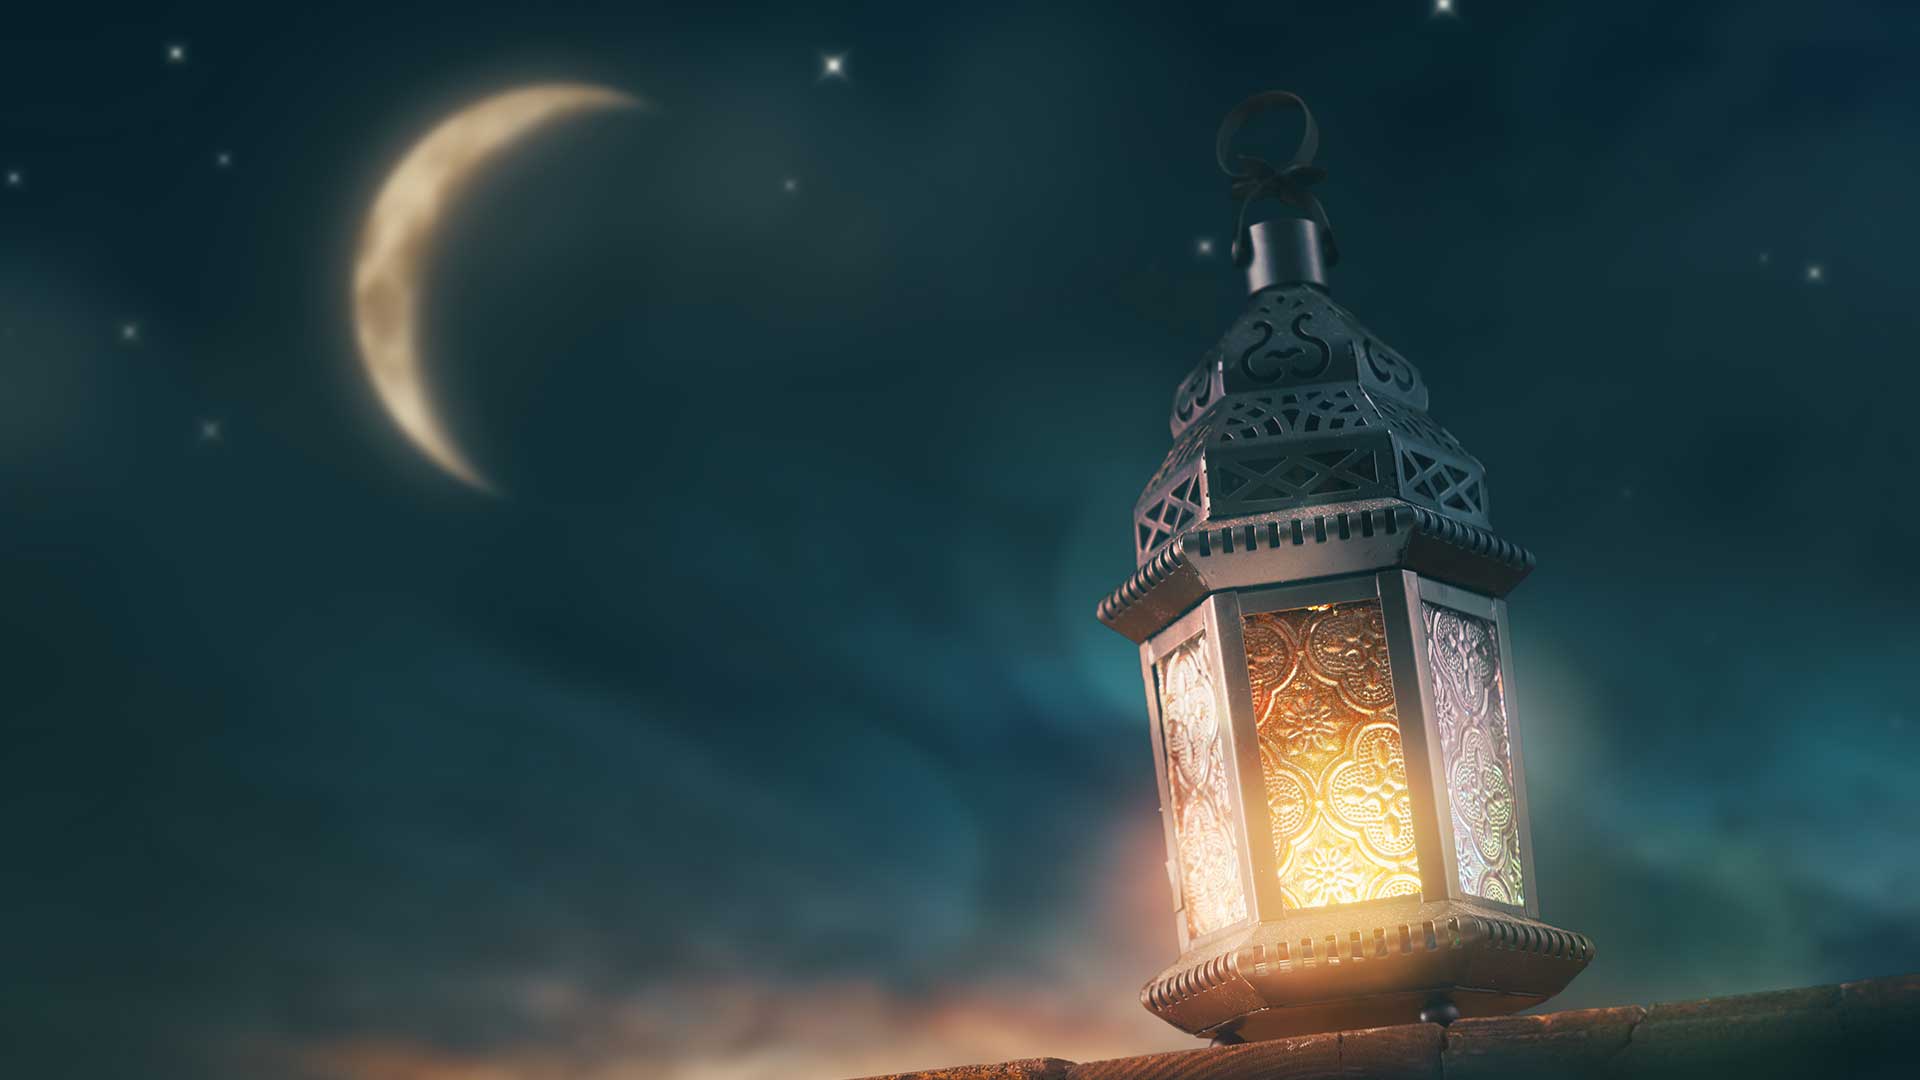 A crescent moon and a lantern called a fanous